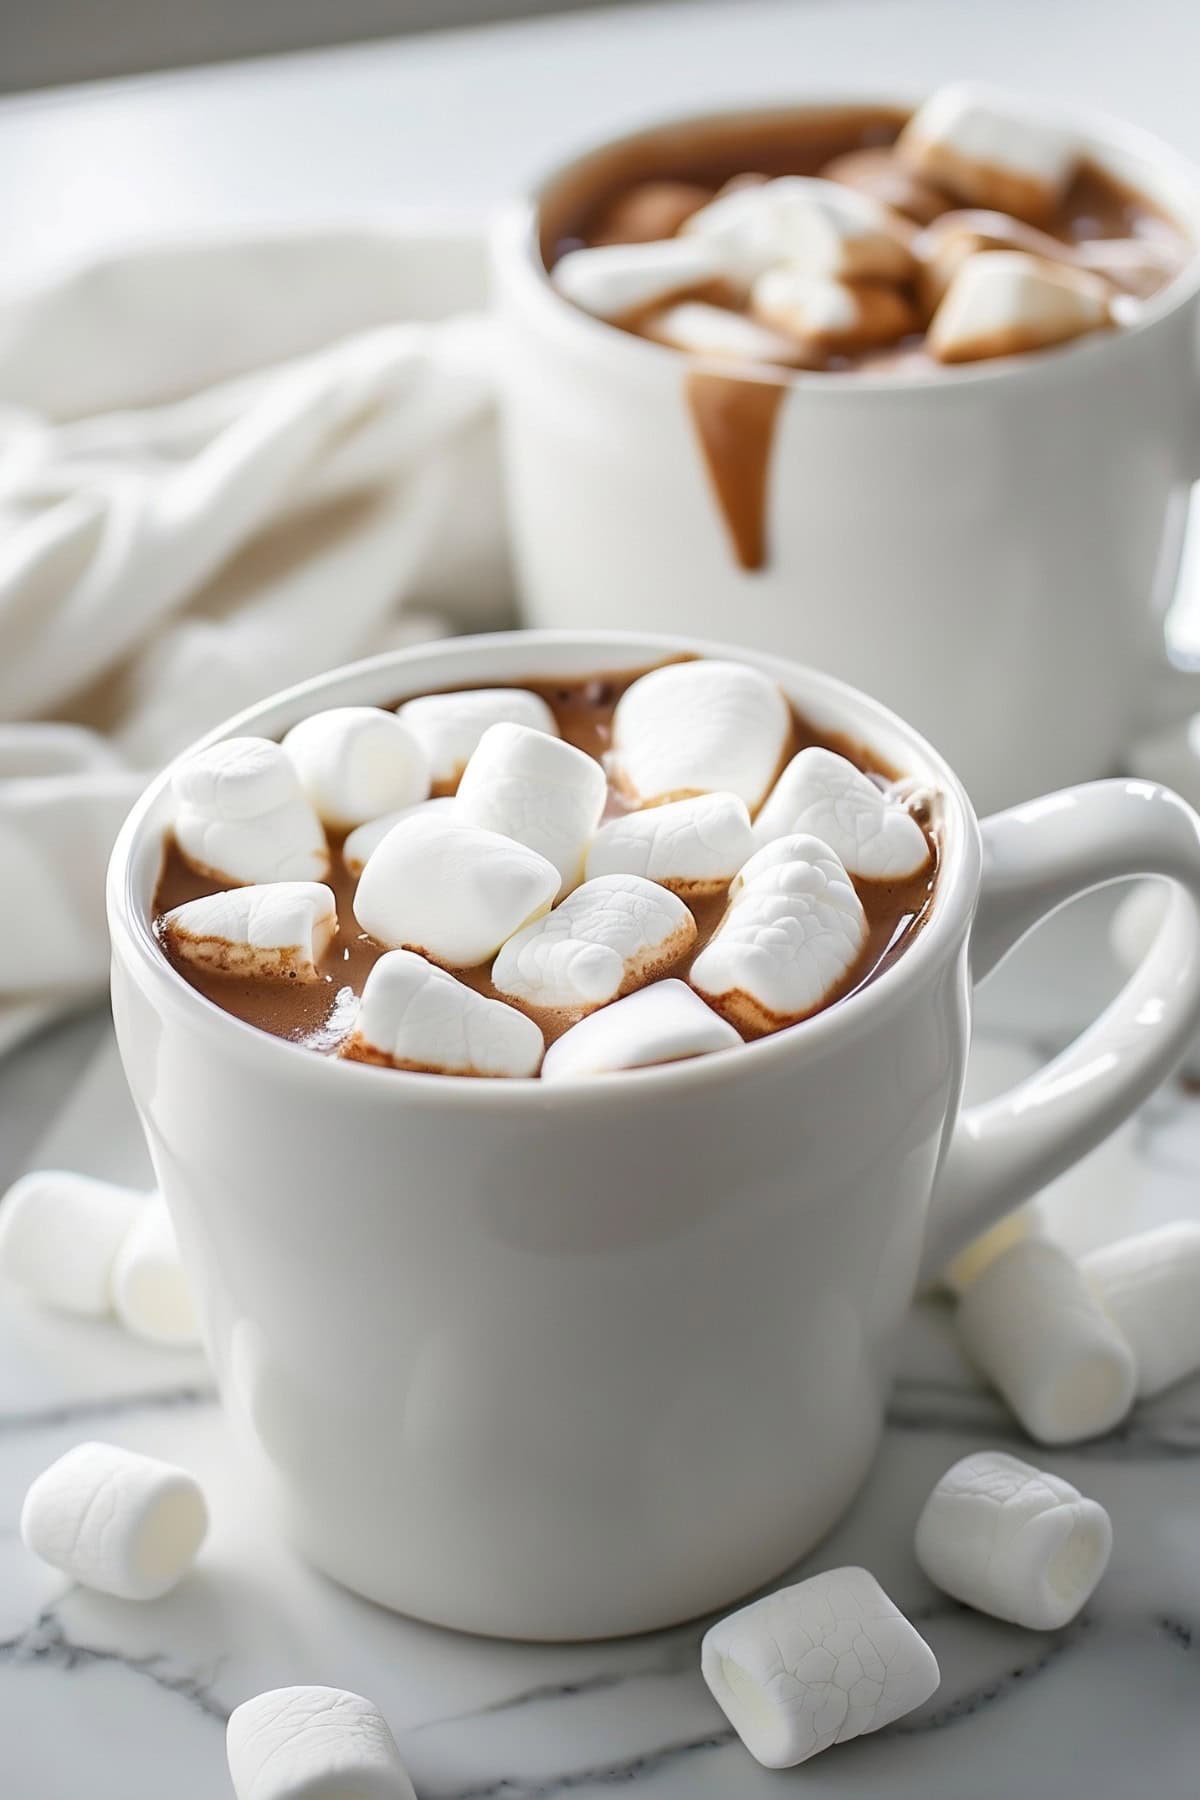 Two Mugs of Crockpot Hot Chocolate with Marshmallows, Dripping Chocolate on a White Marble Table with More Marshmallows Around the Mugs